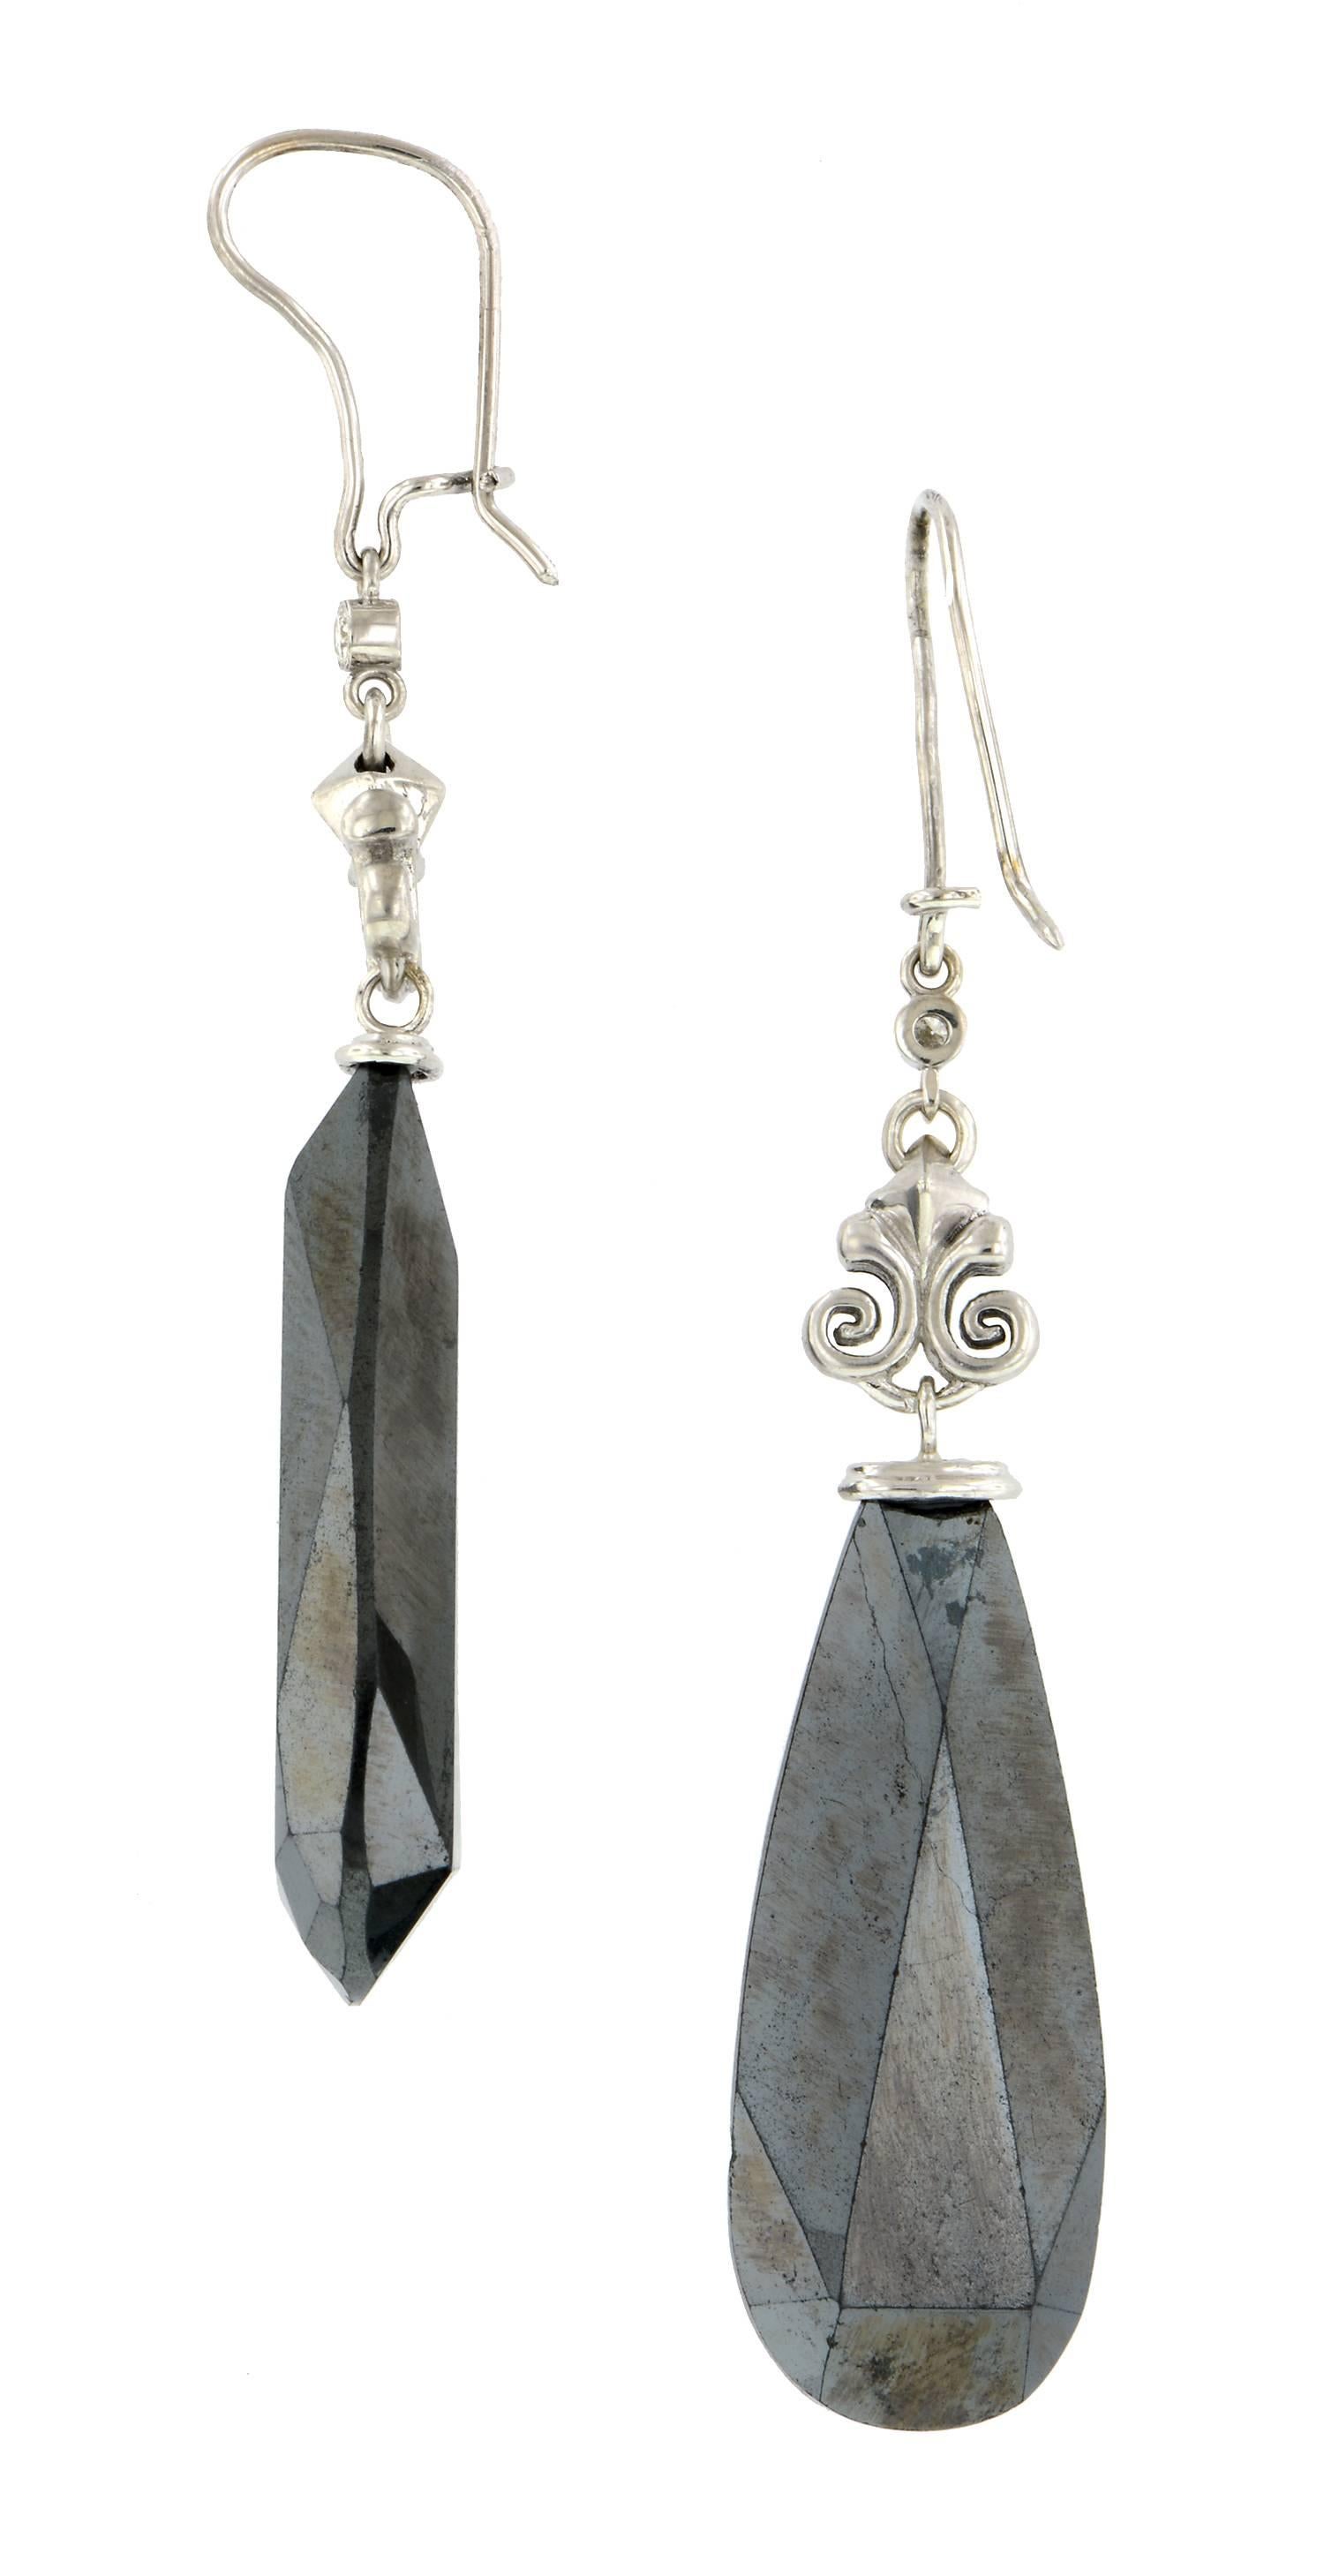 Hematite & Diamond Drop Earrings by Doyle & Doyle measuring app. 2 1/2 inches in length, set with two Round Brilliant cut diamonds weighing app. 0.07ctw, fashioned in 18k white gold. Contemporary.